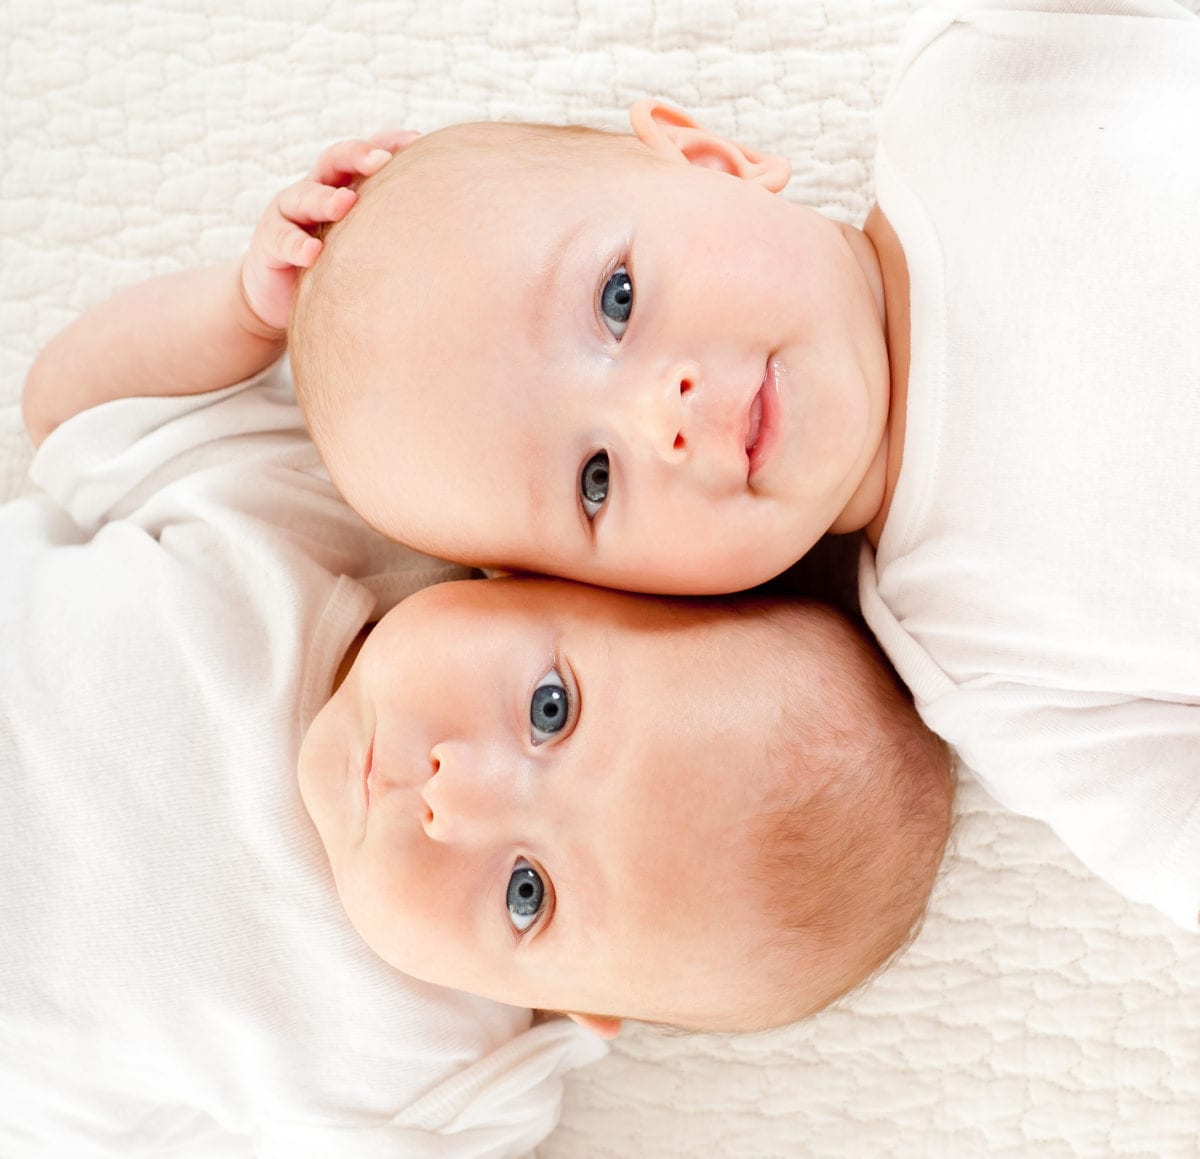 40 Cute Name Sets for Twins